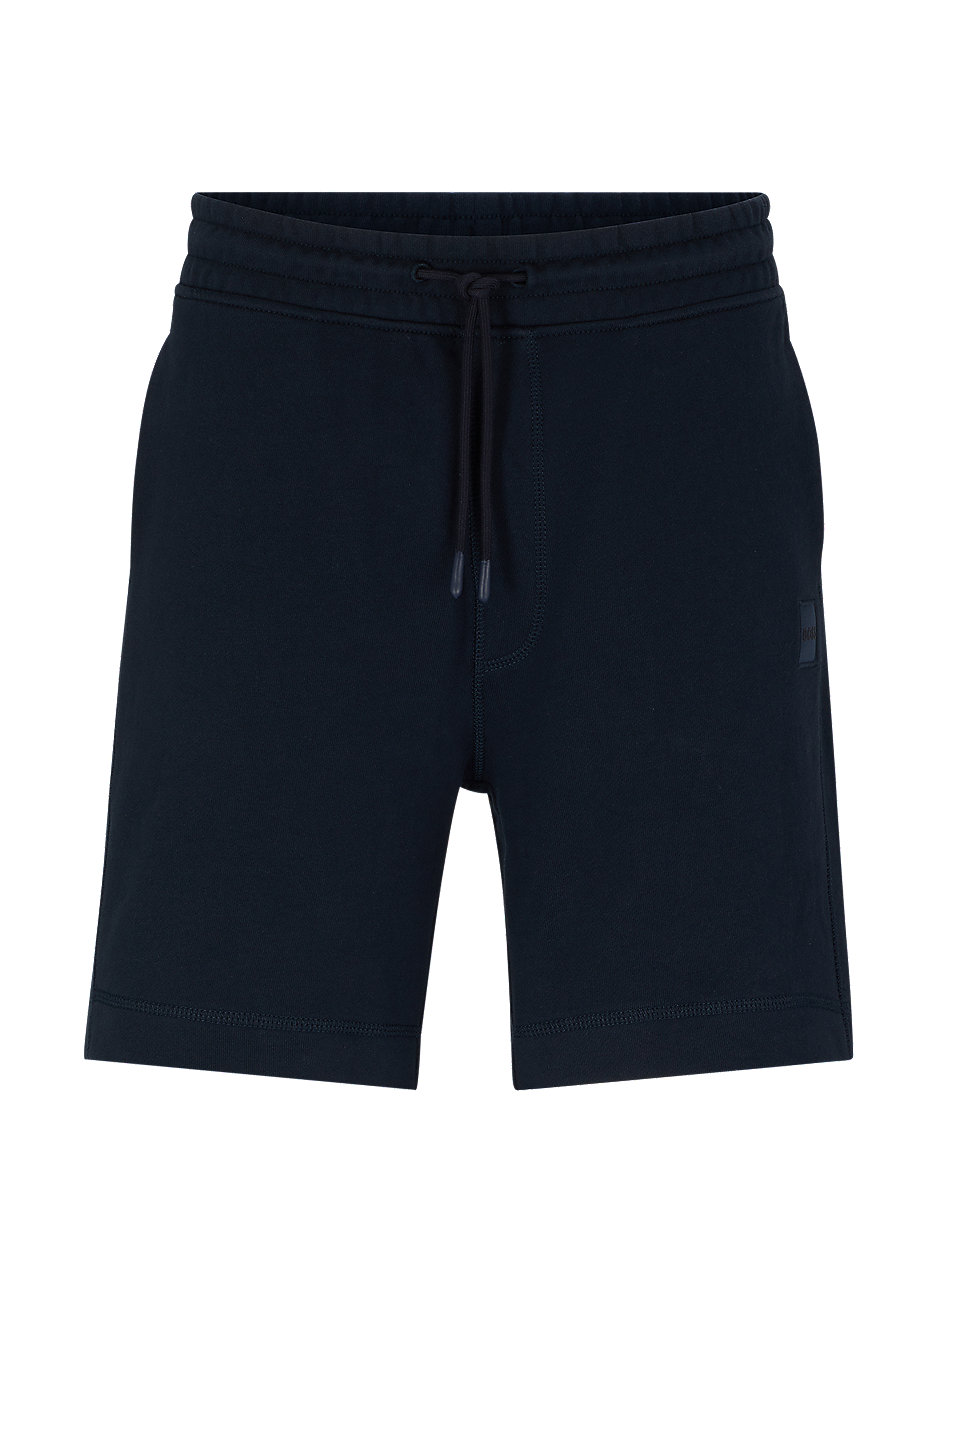 BOSS - Drawstring shorts in French terry cotton with logo patch